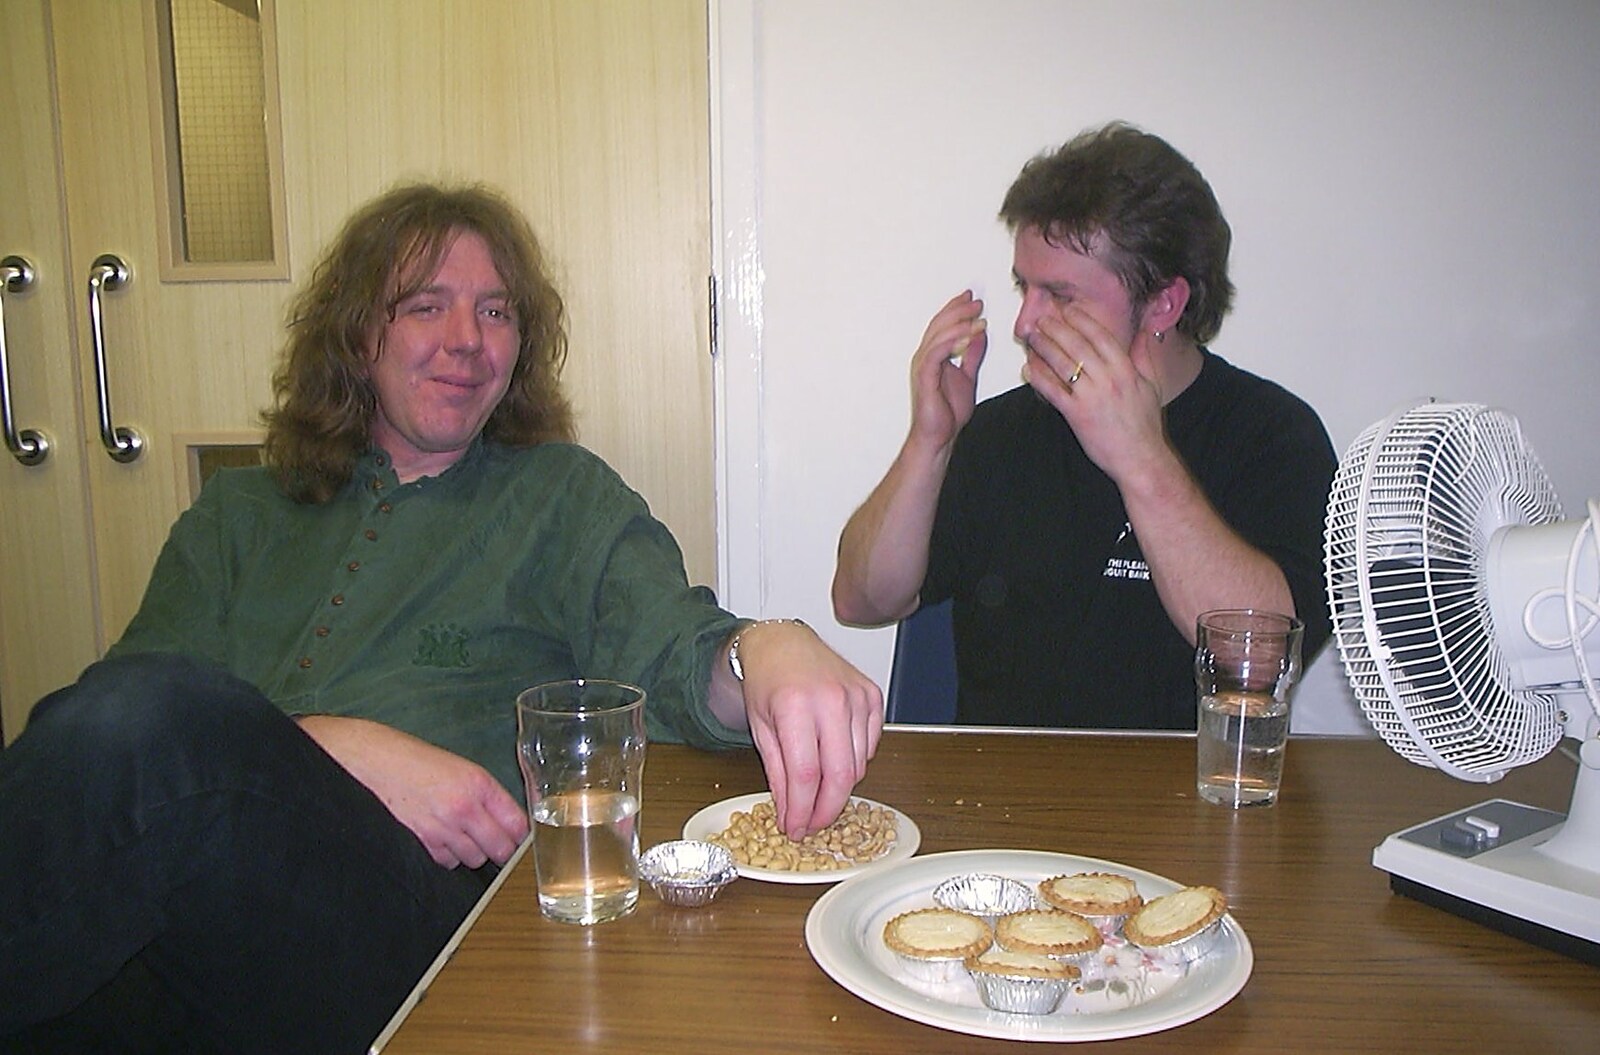 Max eats nuts with Billy Fleming from The BBs and a Visit from Trotsky, Bressingham, Norfolk - 13th December 2003